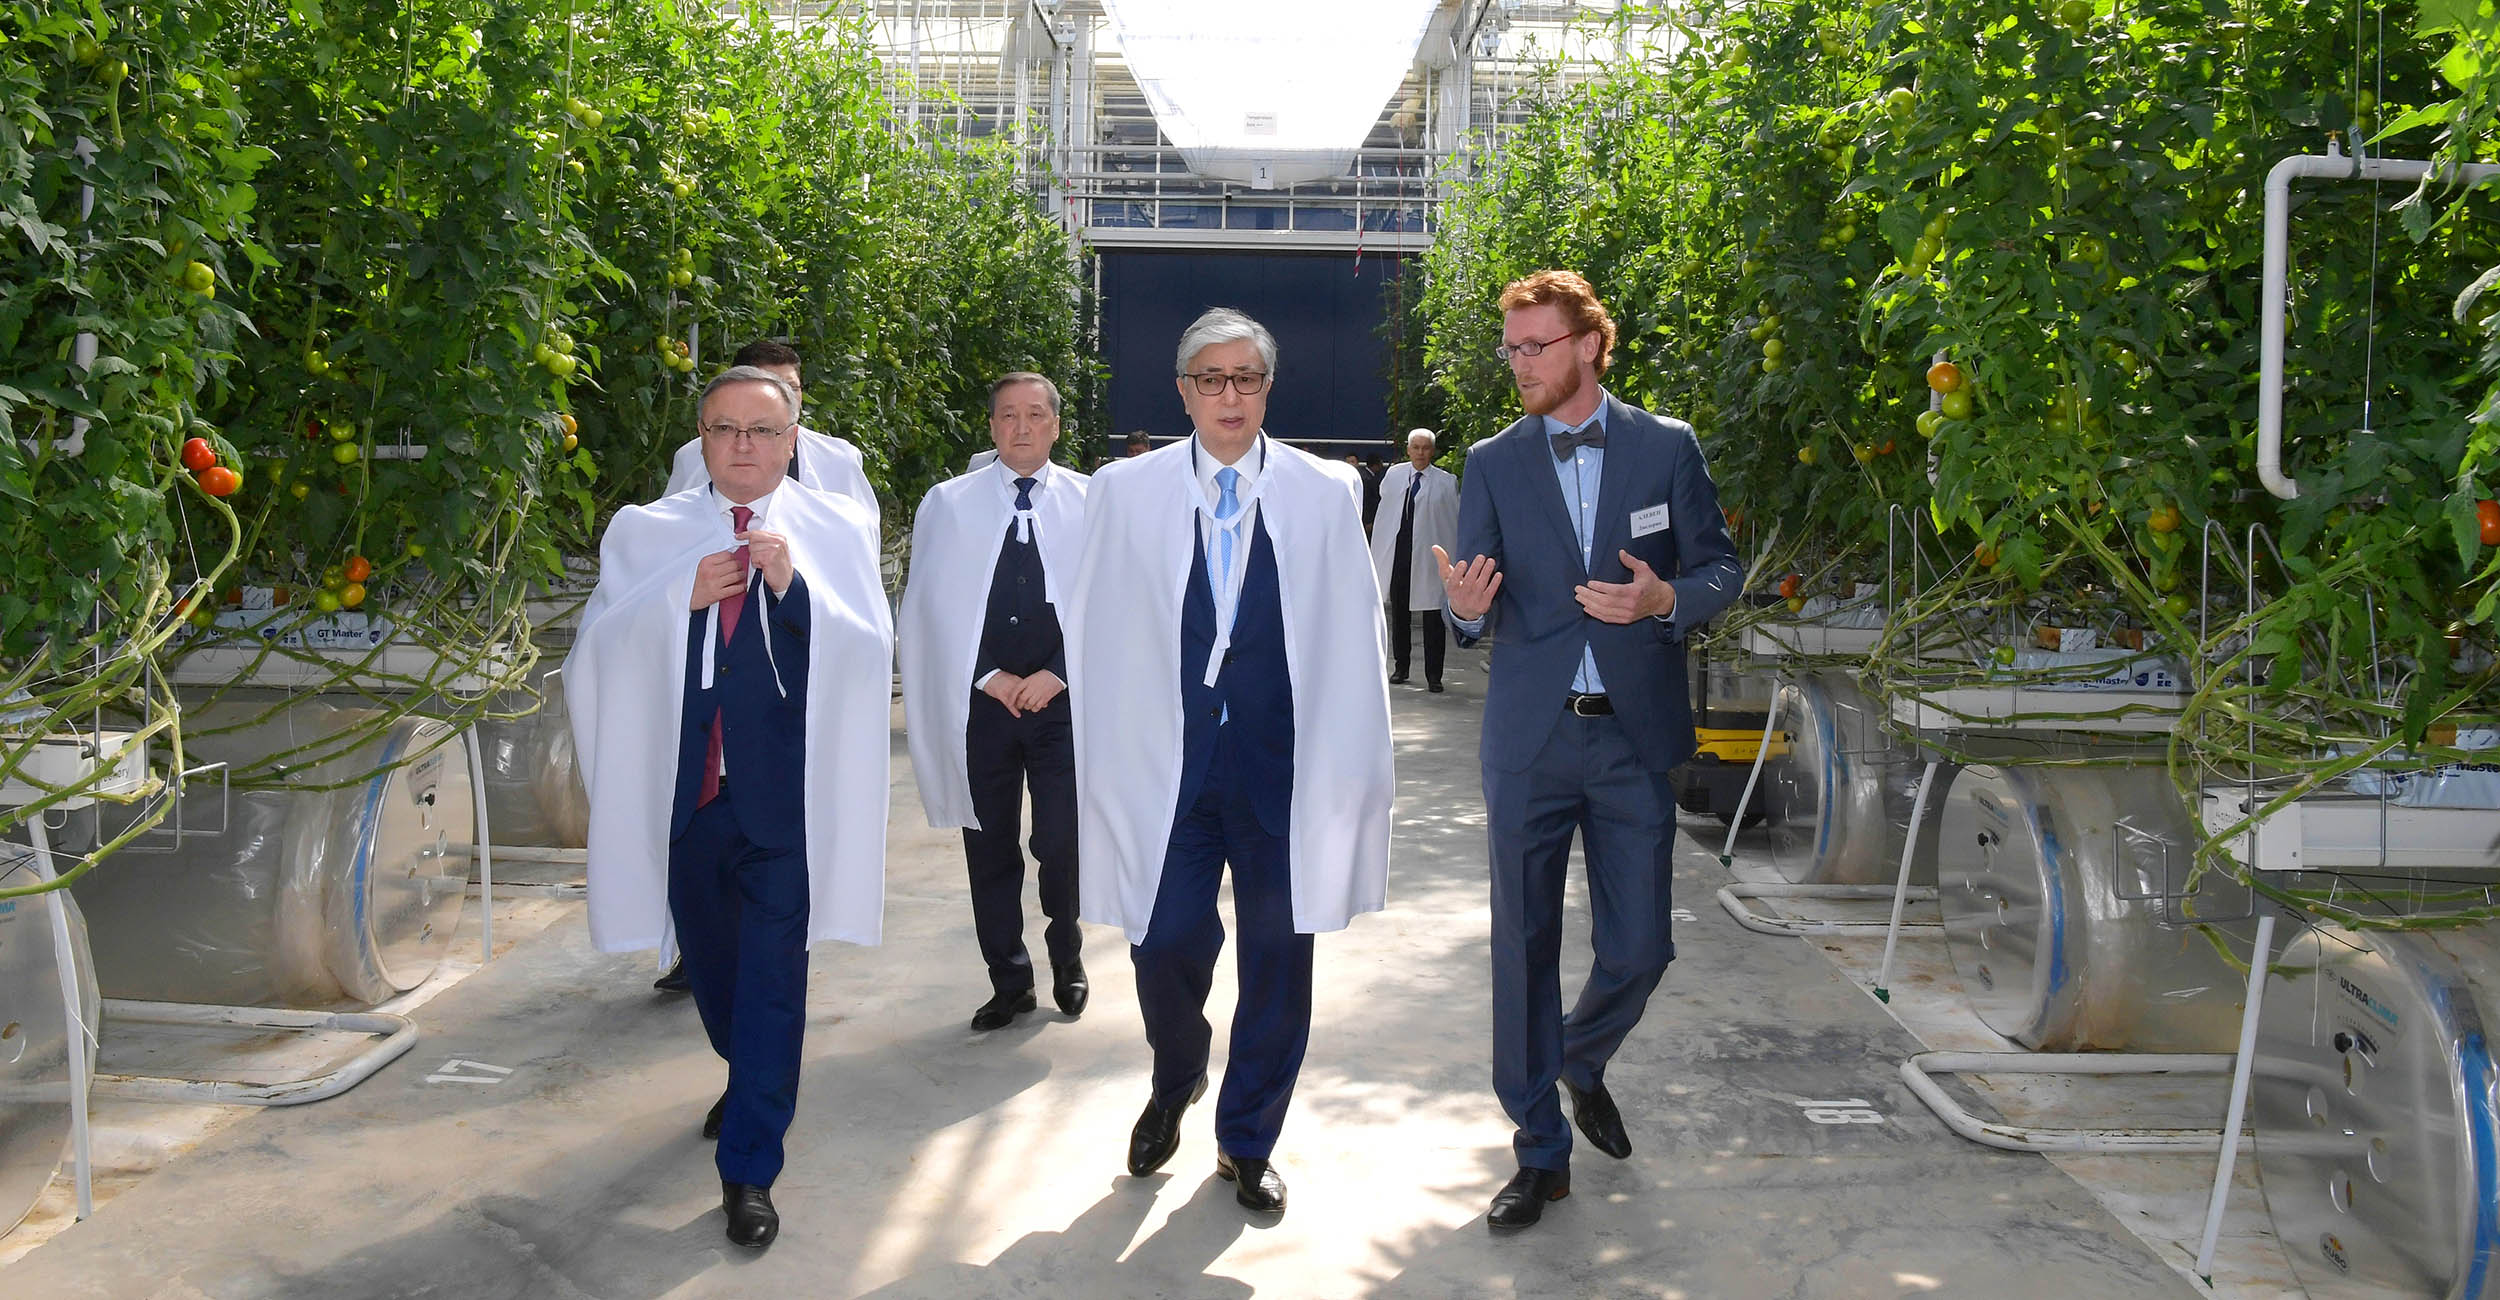 The head of state visits the greenhouse complex Green Capital Kazakhstan